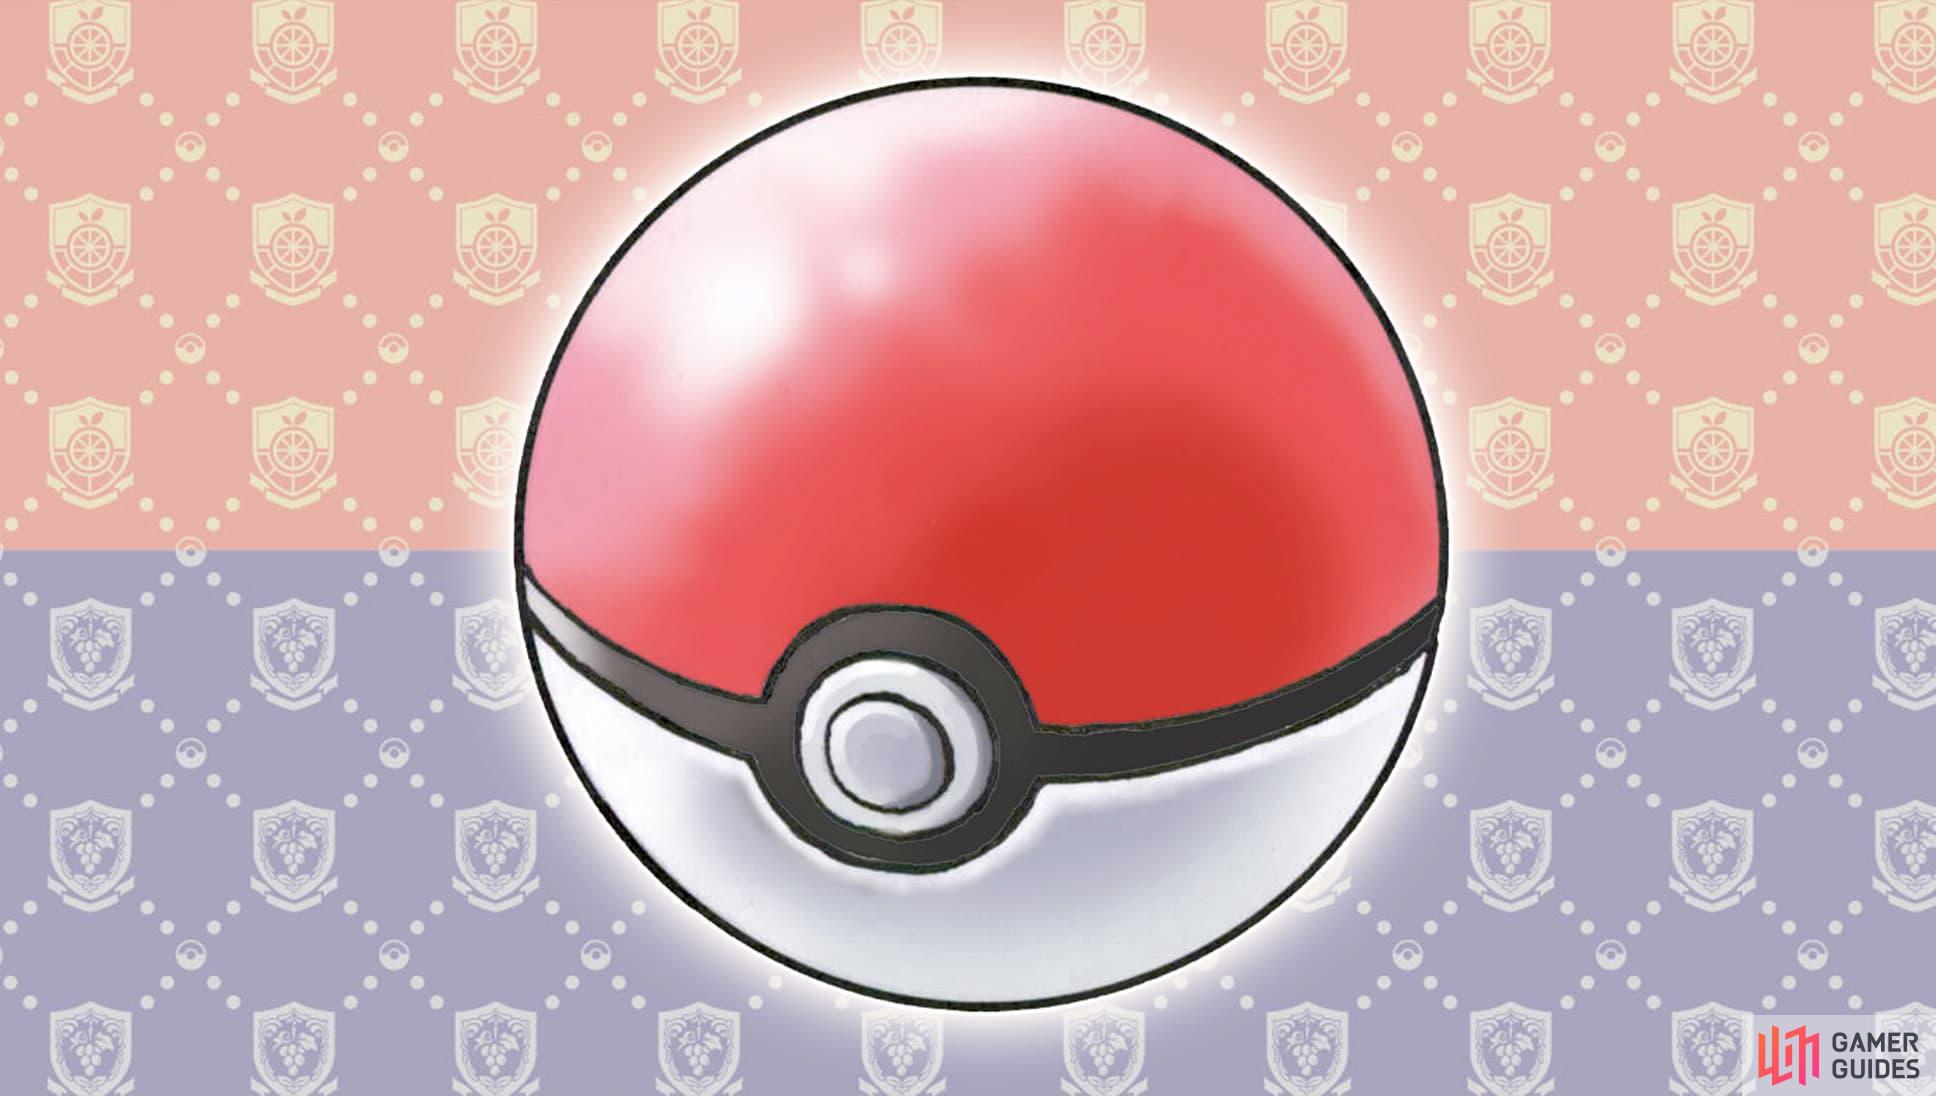 One of the 200 Poké Balls you can receive. (Credit: The Pokémon Company)